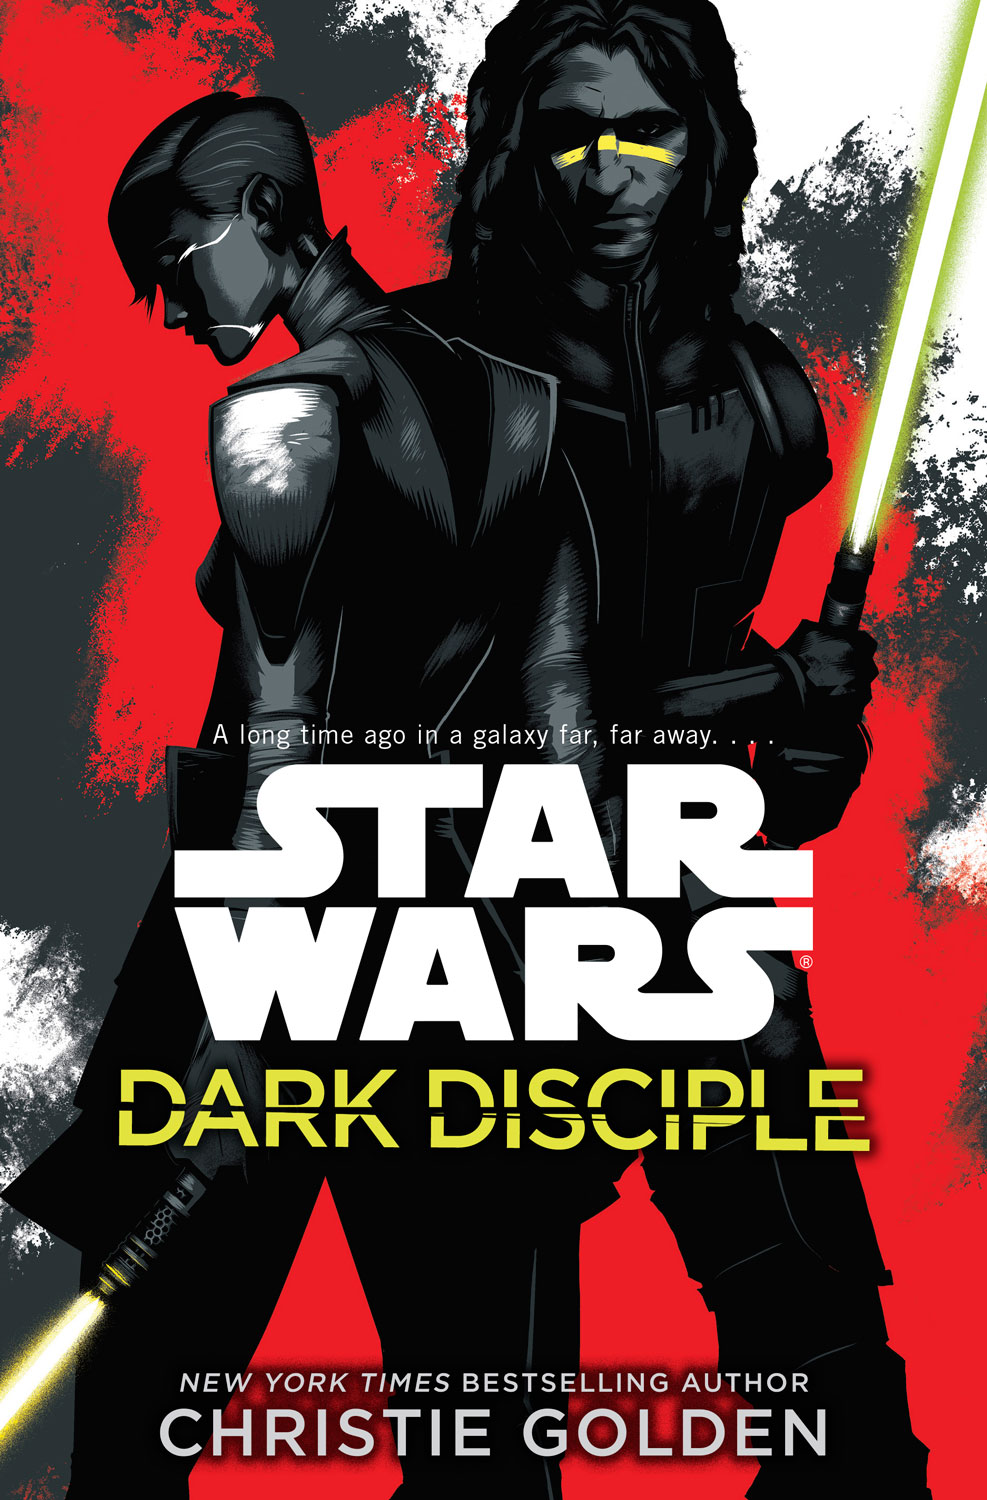 Star Wars Dark Disciple – An Intriguing Novel that Continues the Clone Wars Story!